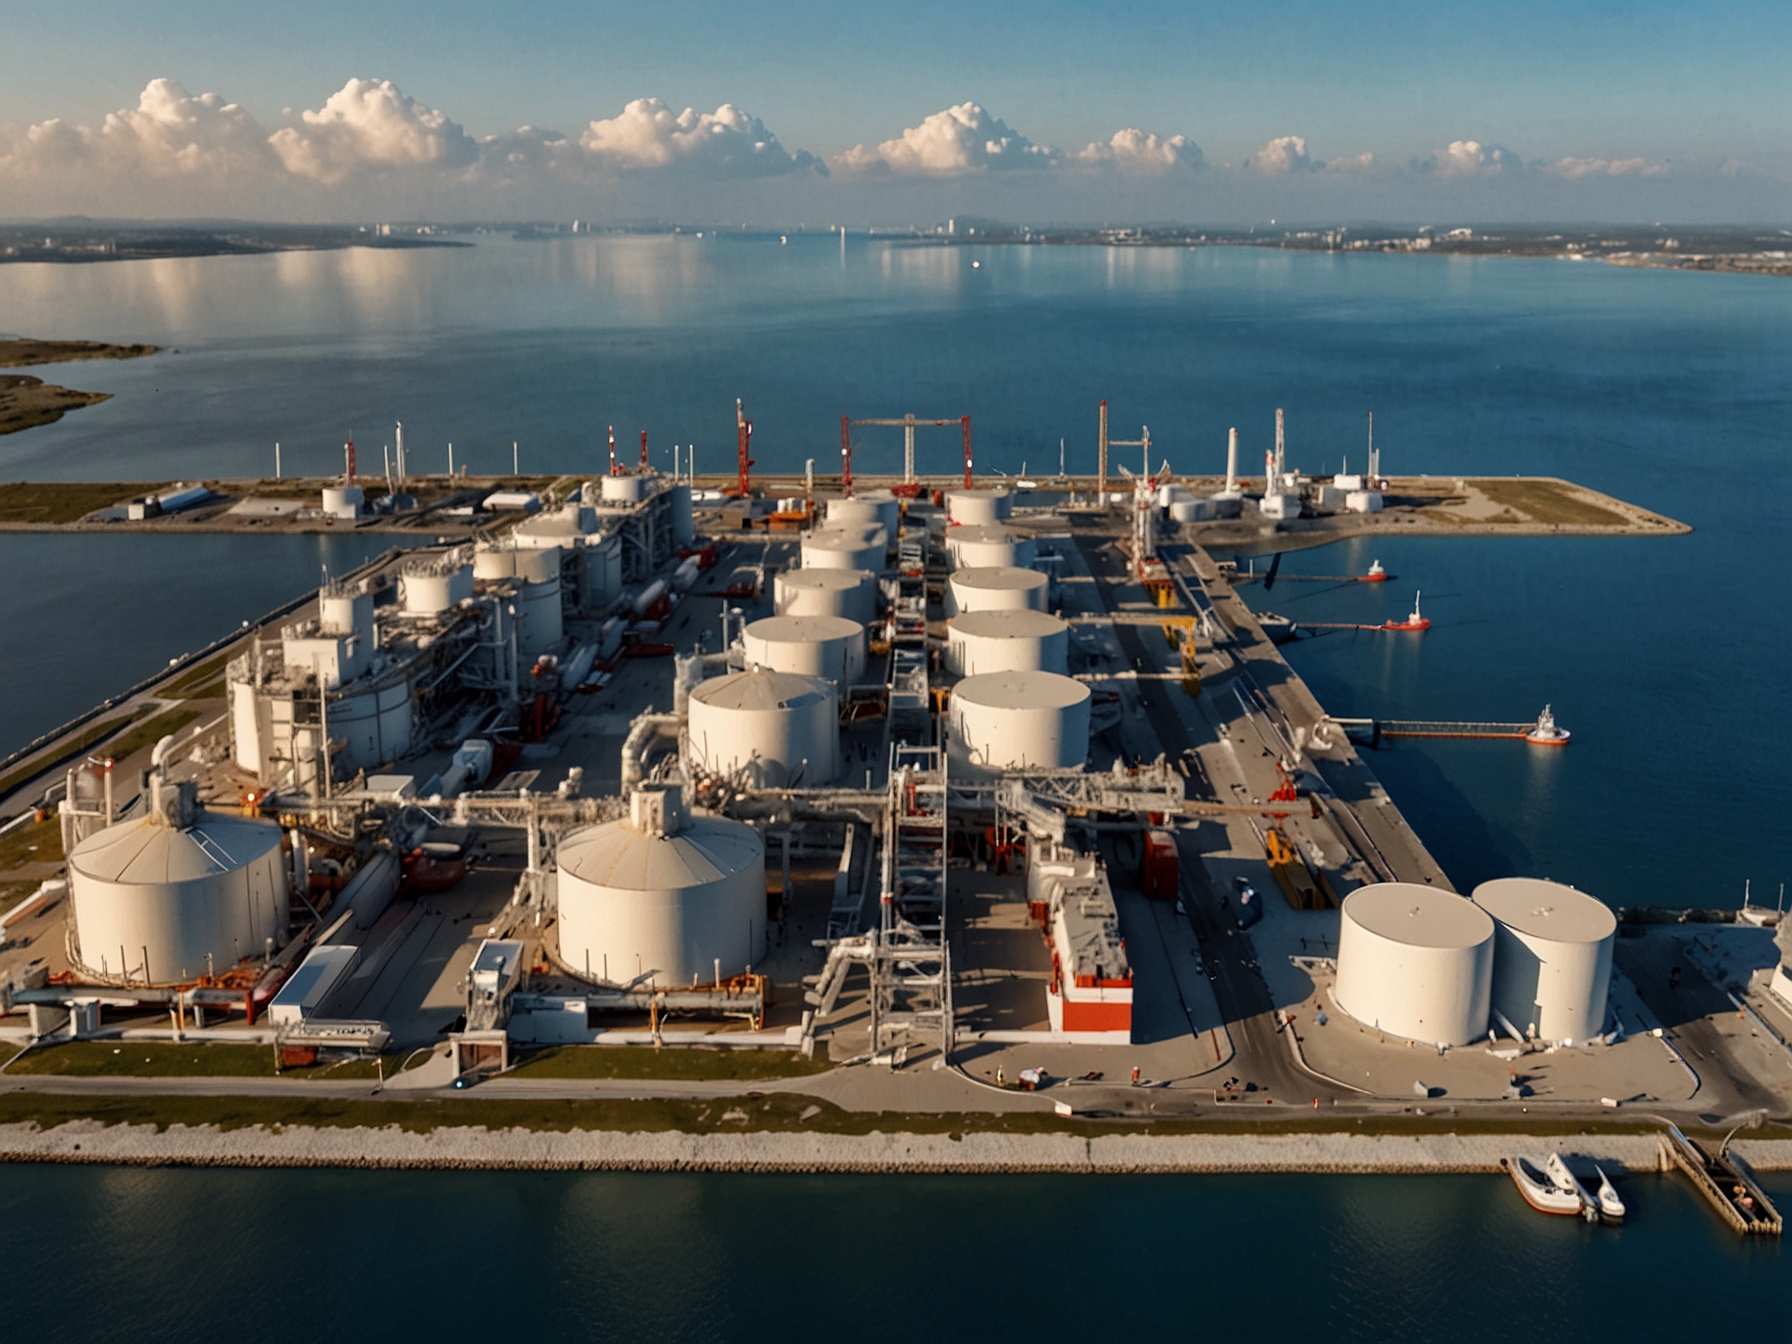 An image of a liquefied natural gas (LNG) terminal in Europe, showcasing the facilities involved in importing and processing LNG, symbolizing the efforts and challenges in diversifying energy sources.